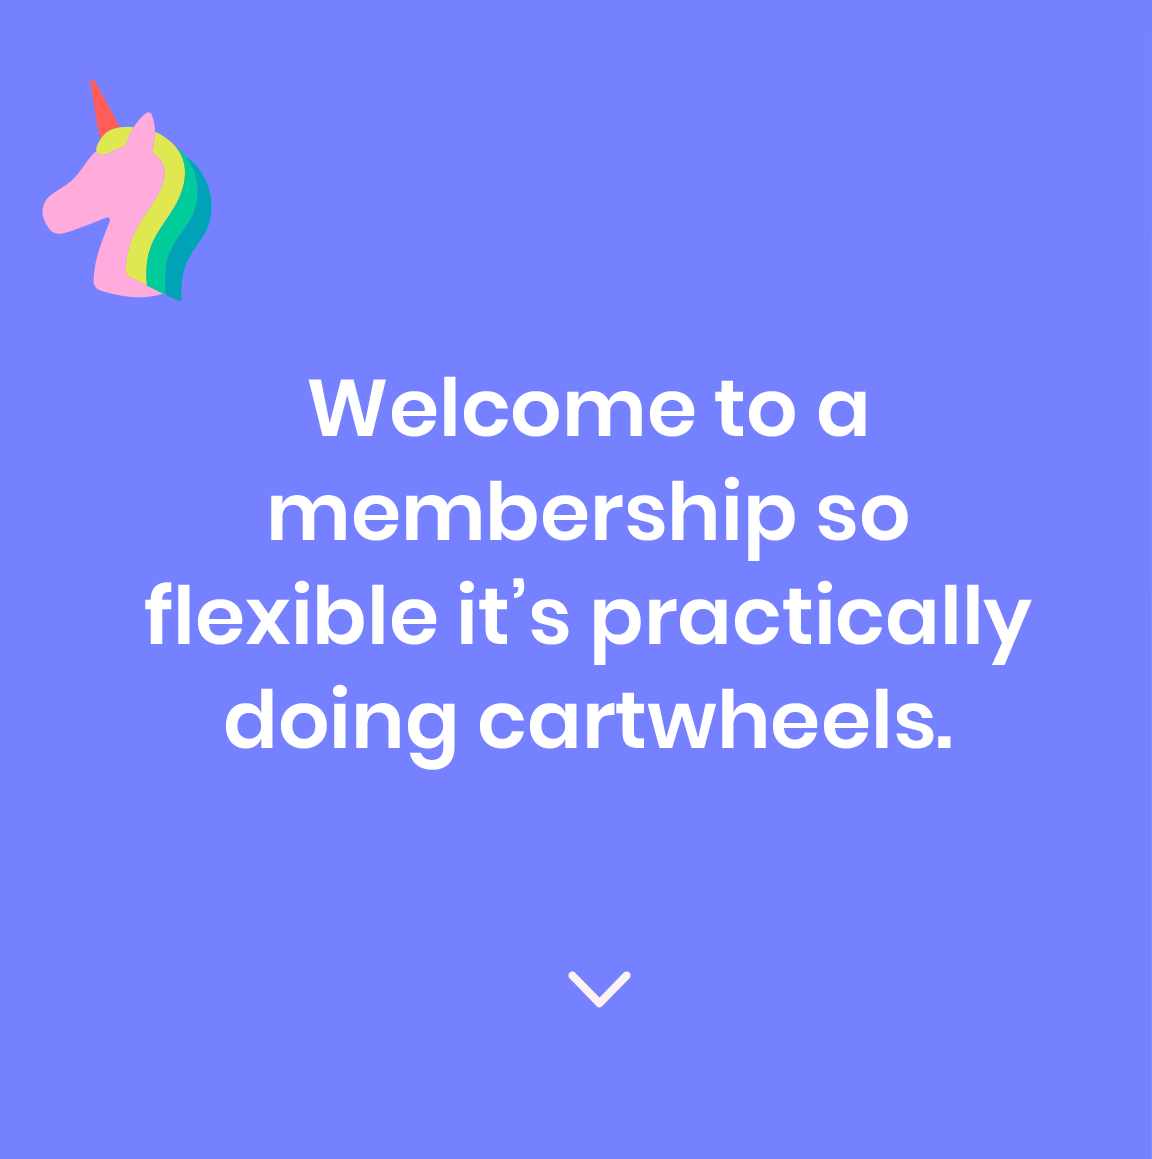 Welcome to a membership so flexible, it's practically doing cartwheels.